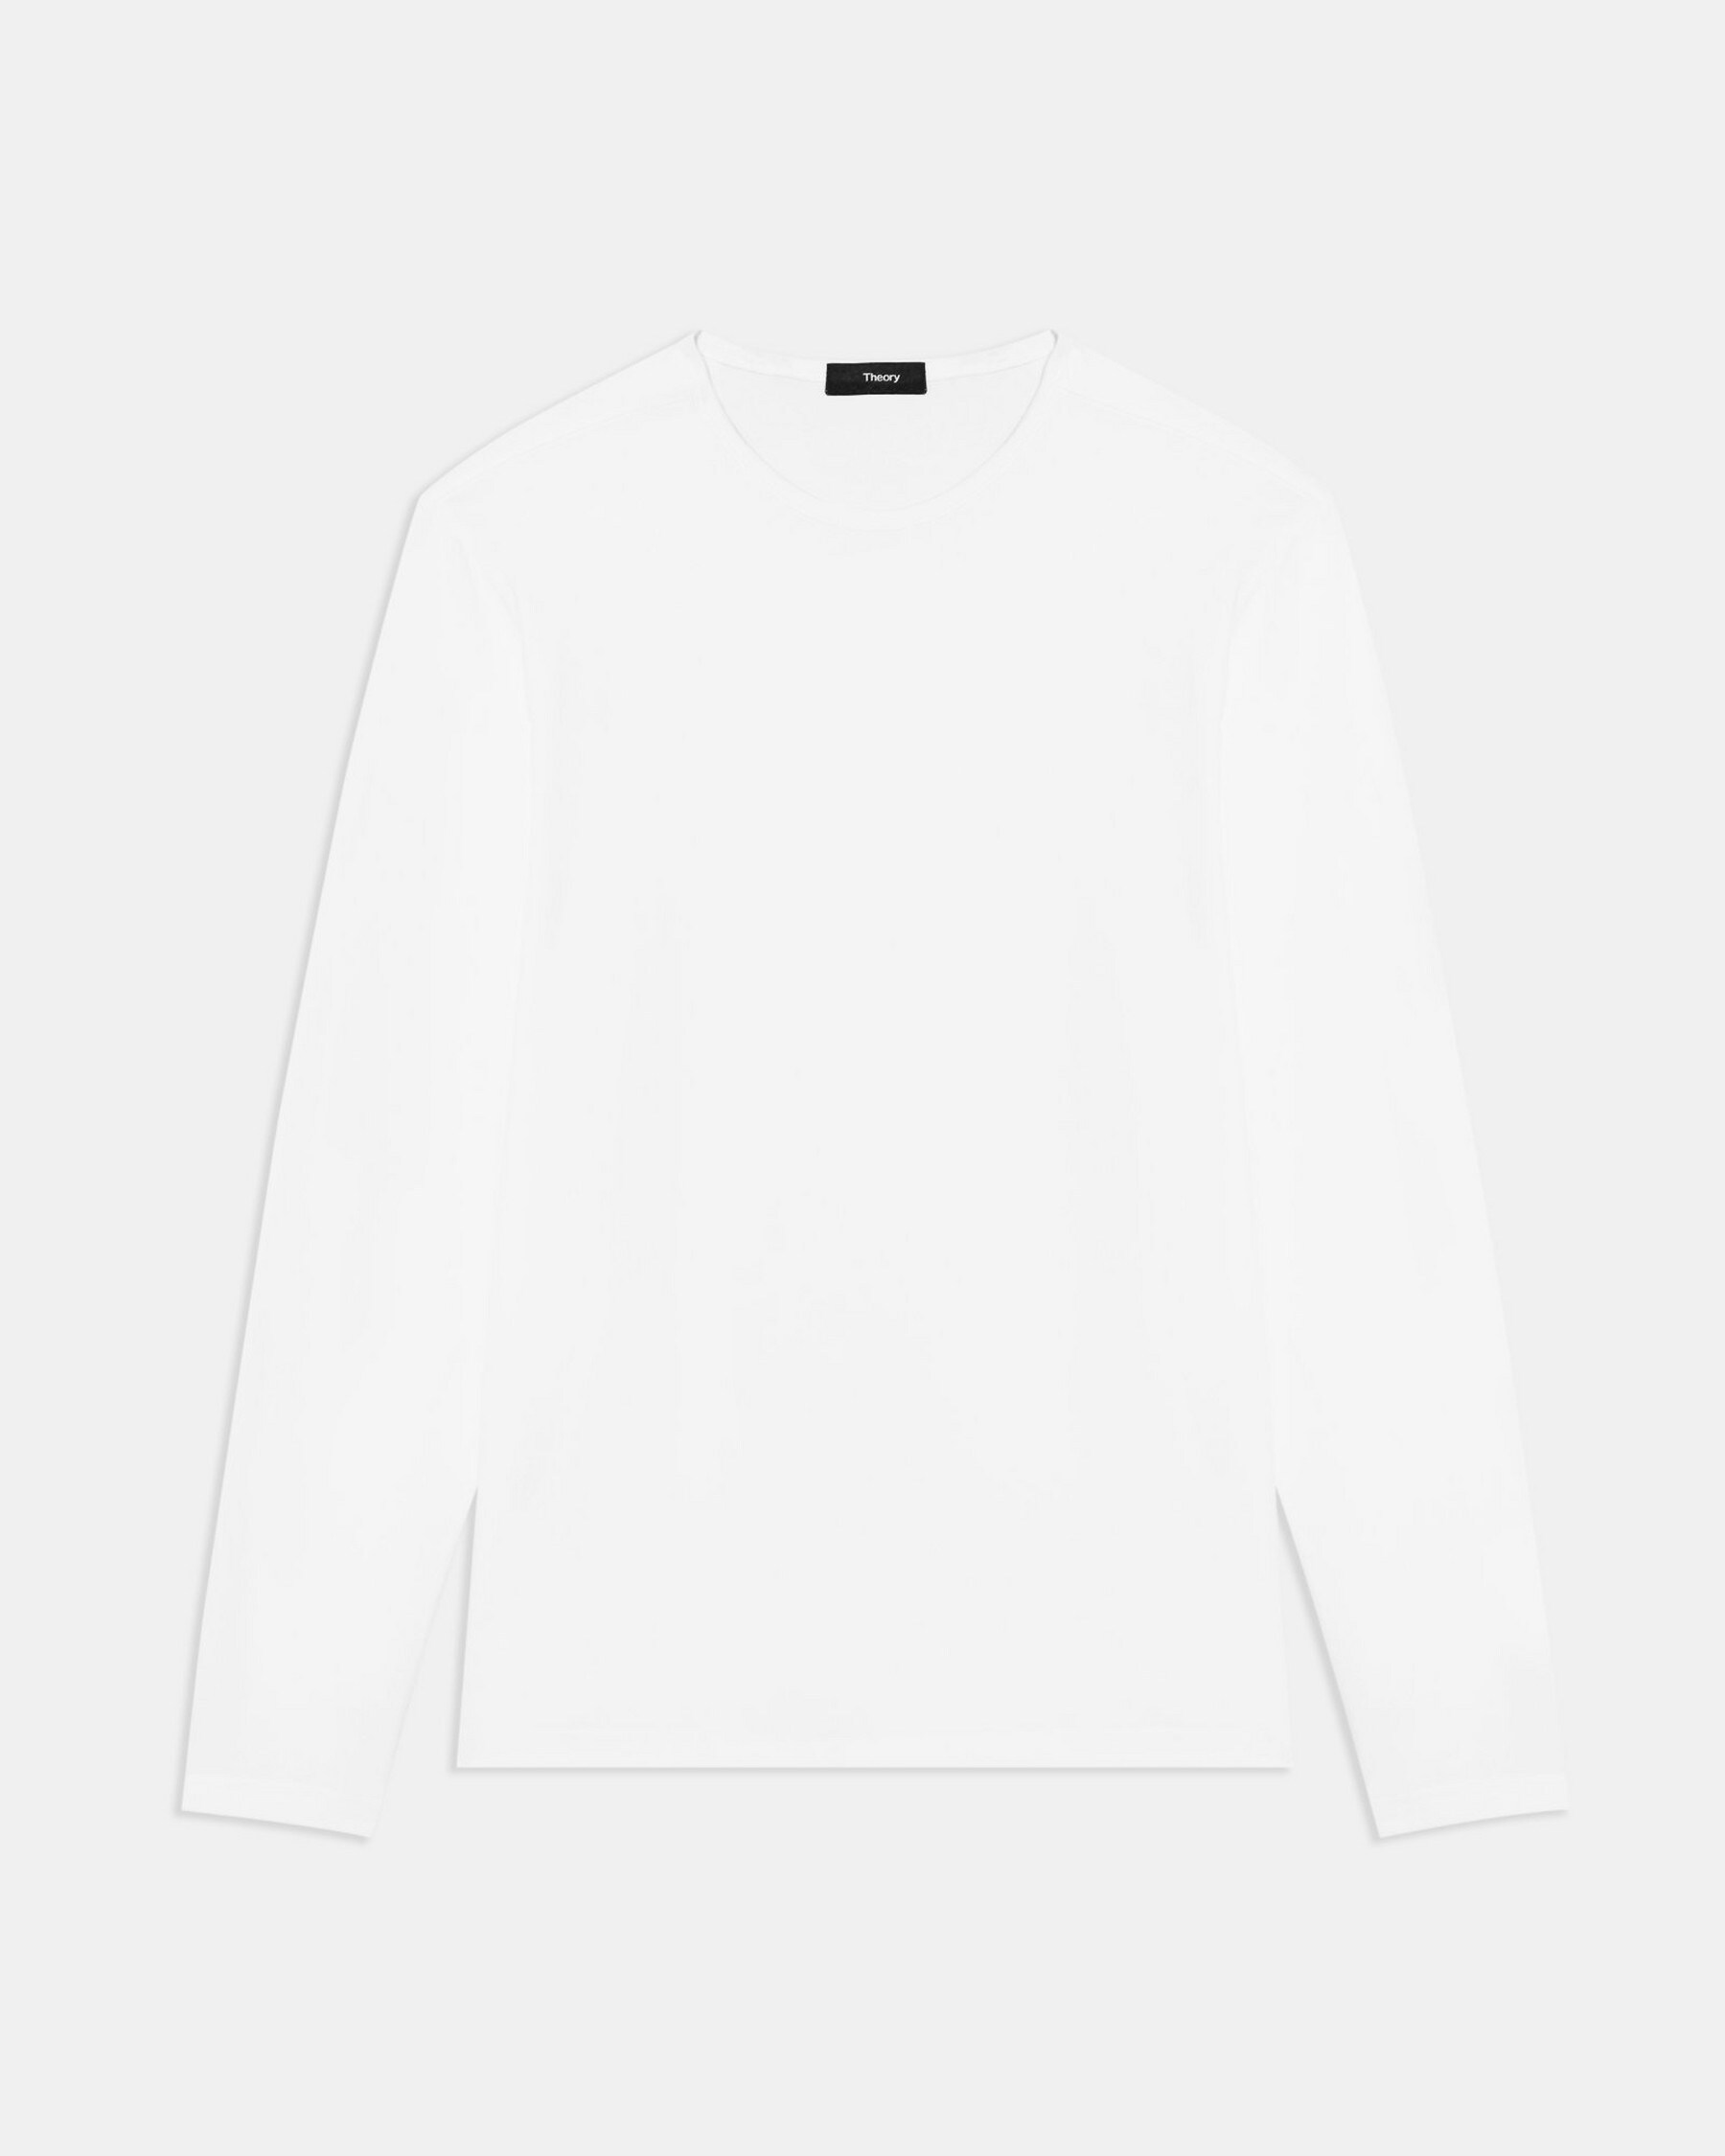 Precise Long-Sleeve Tee in Luxe Cotton Jersey